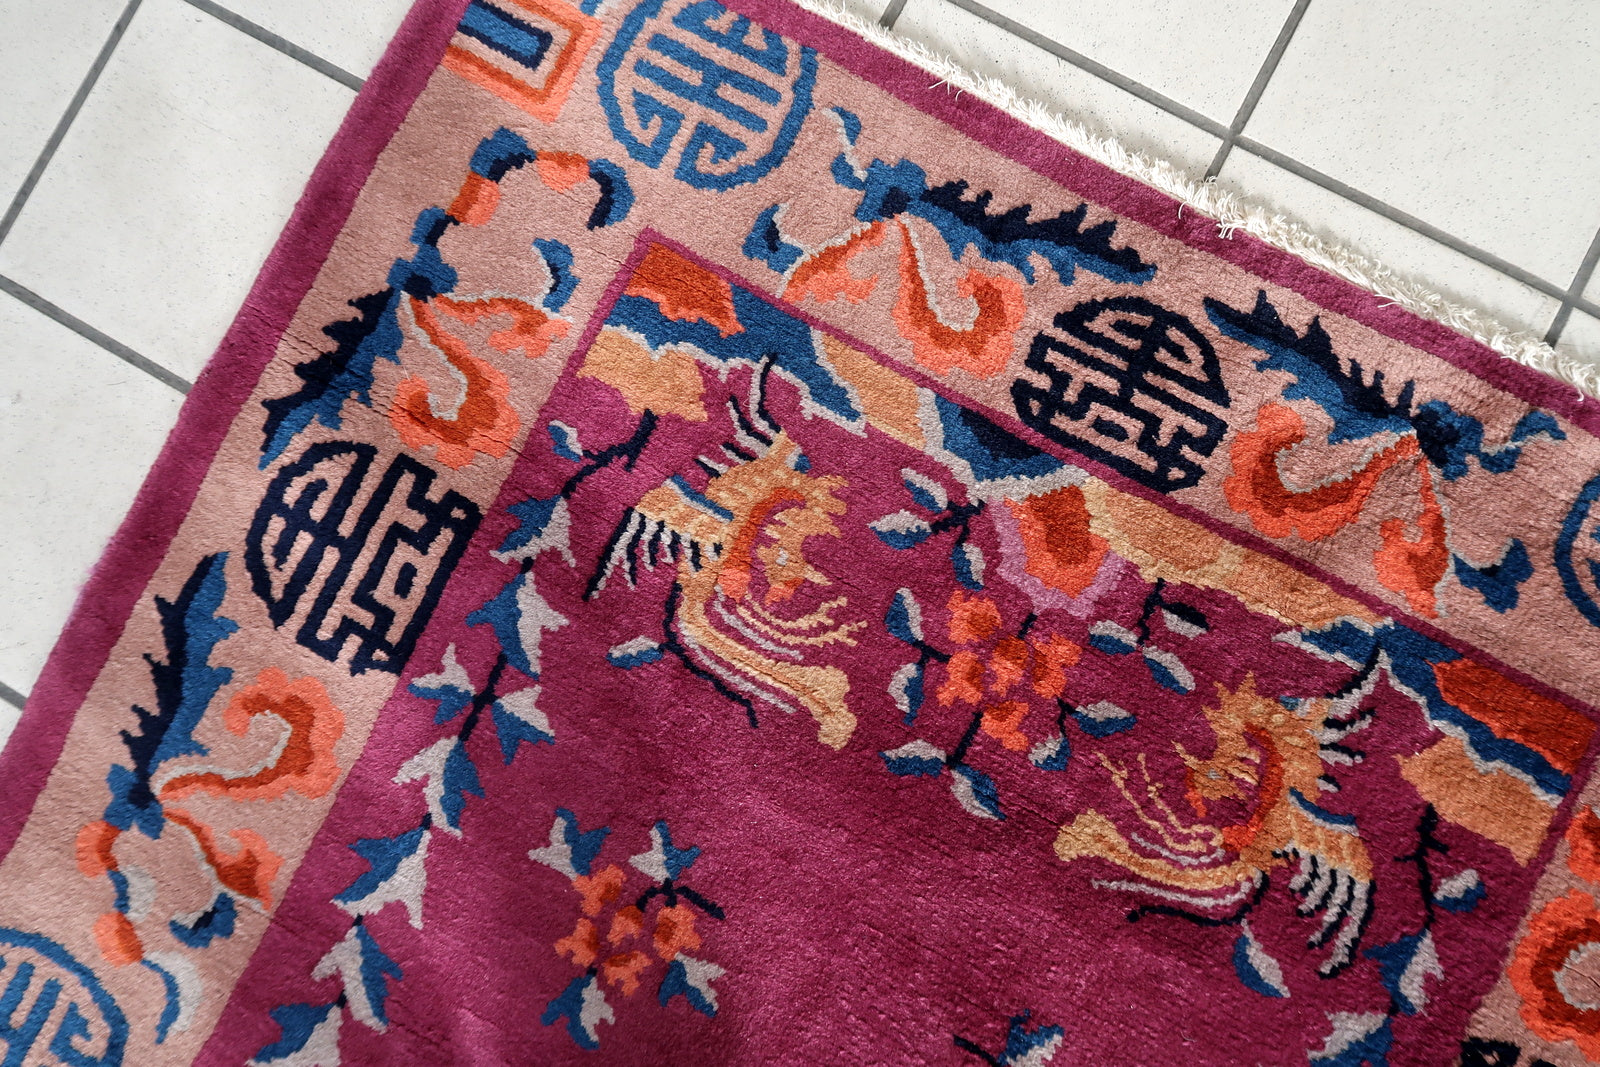 Intricate Designs Featuring Chinese Art Deco Aesthetics on Handmade Antique Rug - 1920s